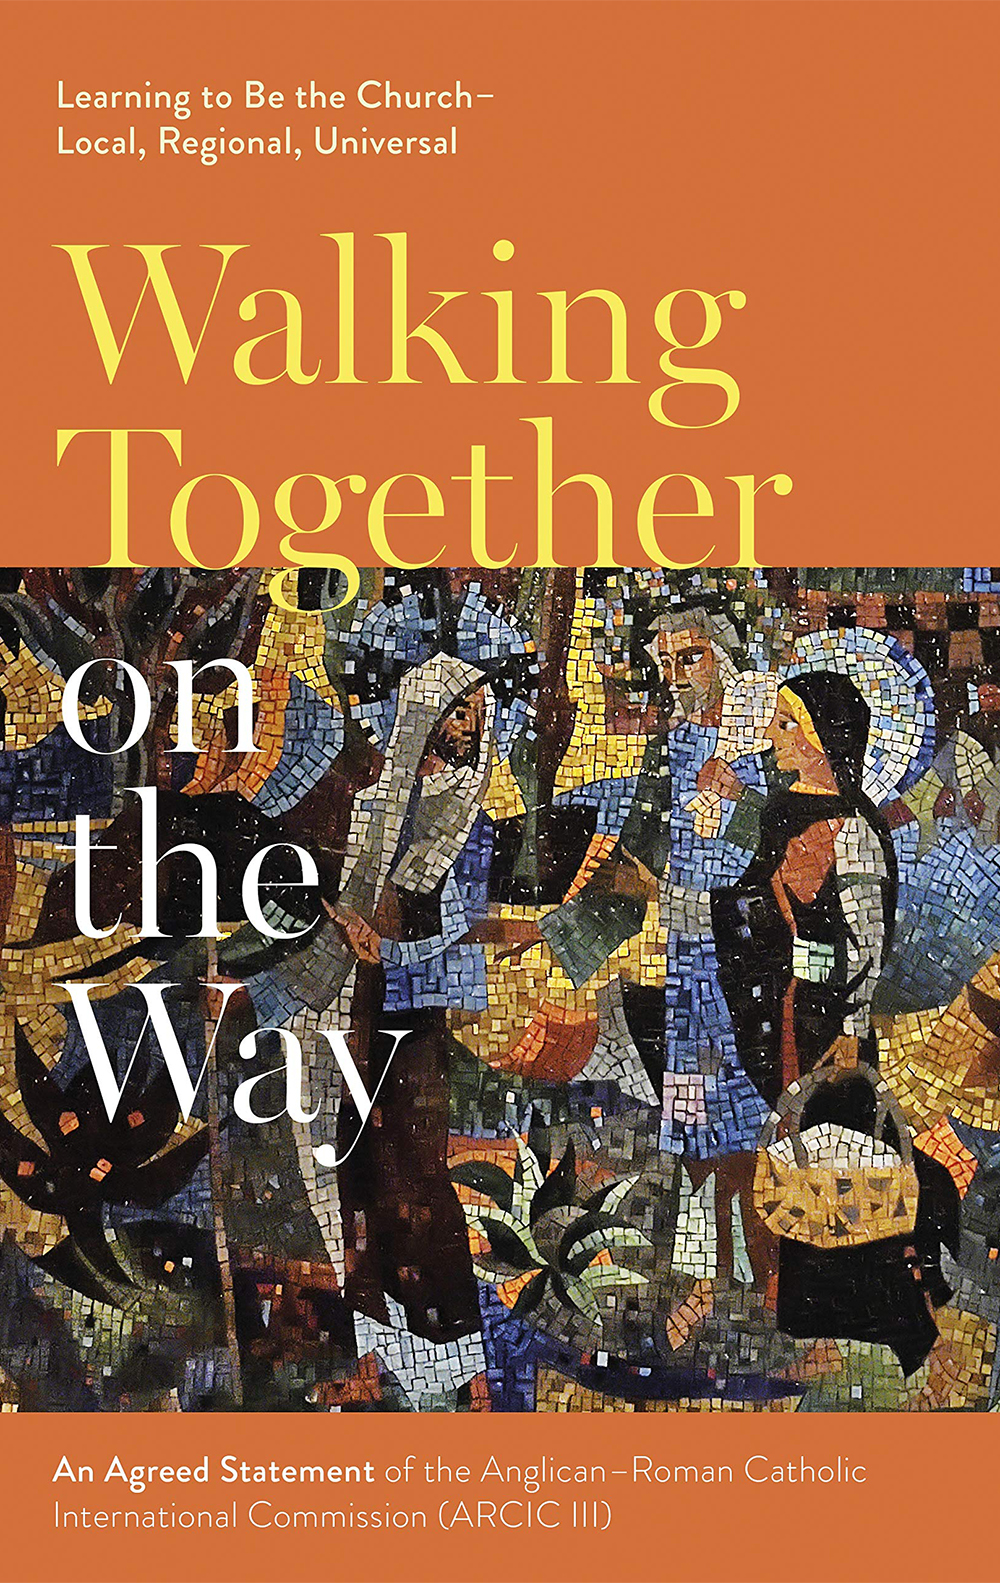 Walking Together on the Way: Learning to be the Church – local, regional, universal